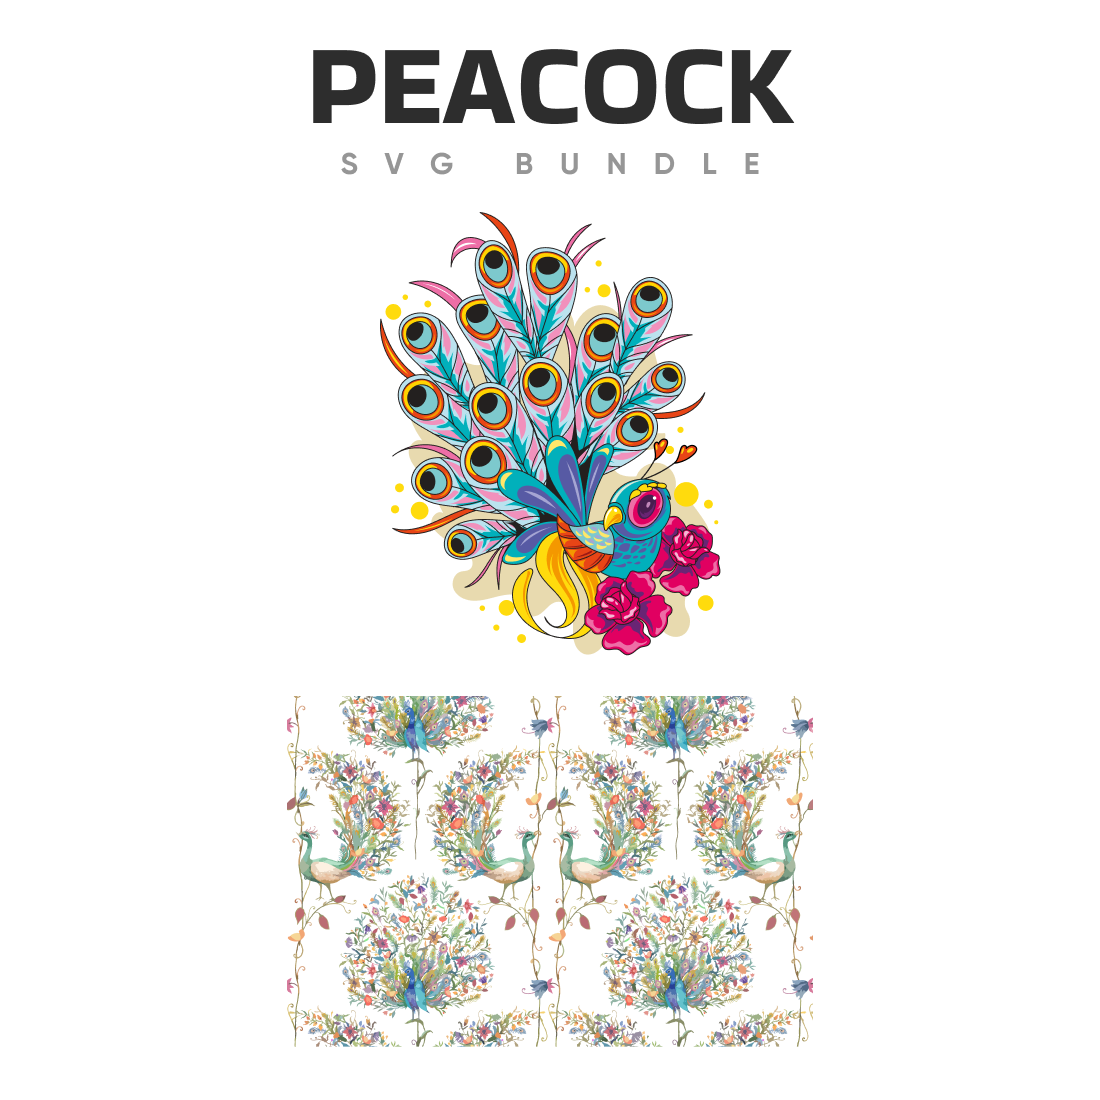 The peacock svg bundle includes a pattern.